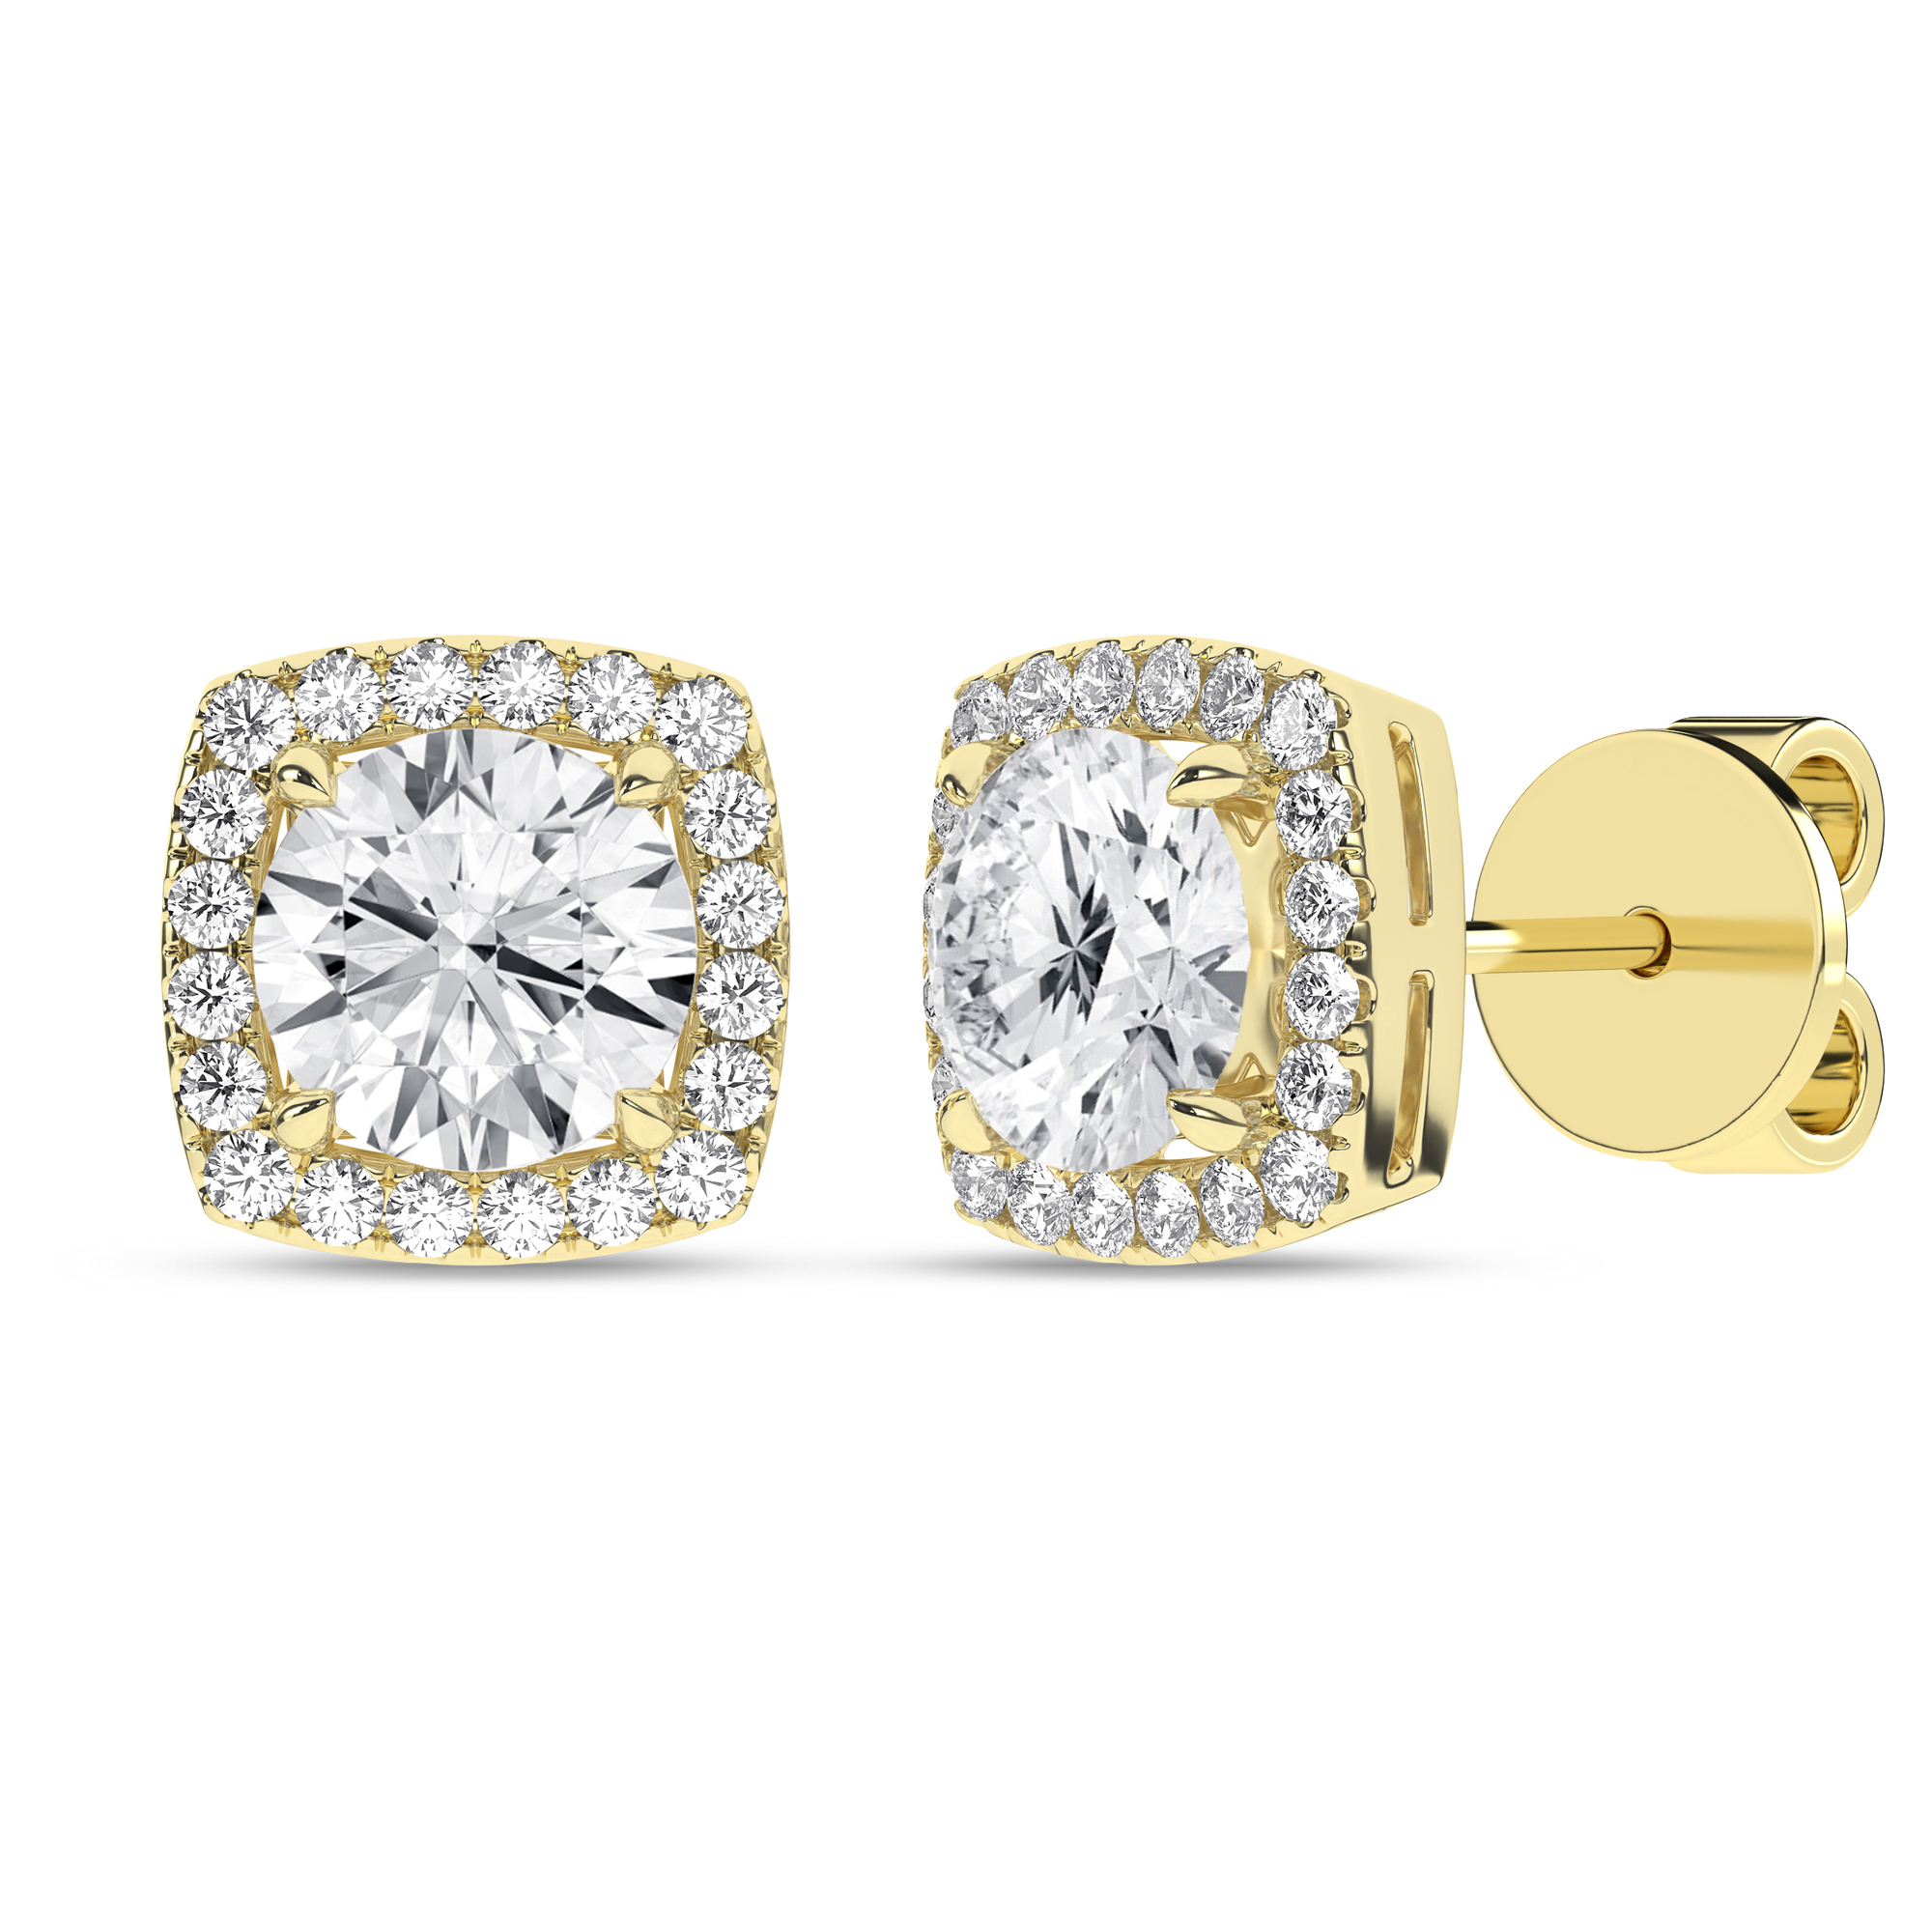 2.25ct. Diamond Halo Earring (Cushion Shape With Round Centre )